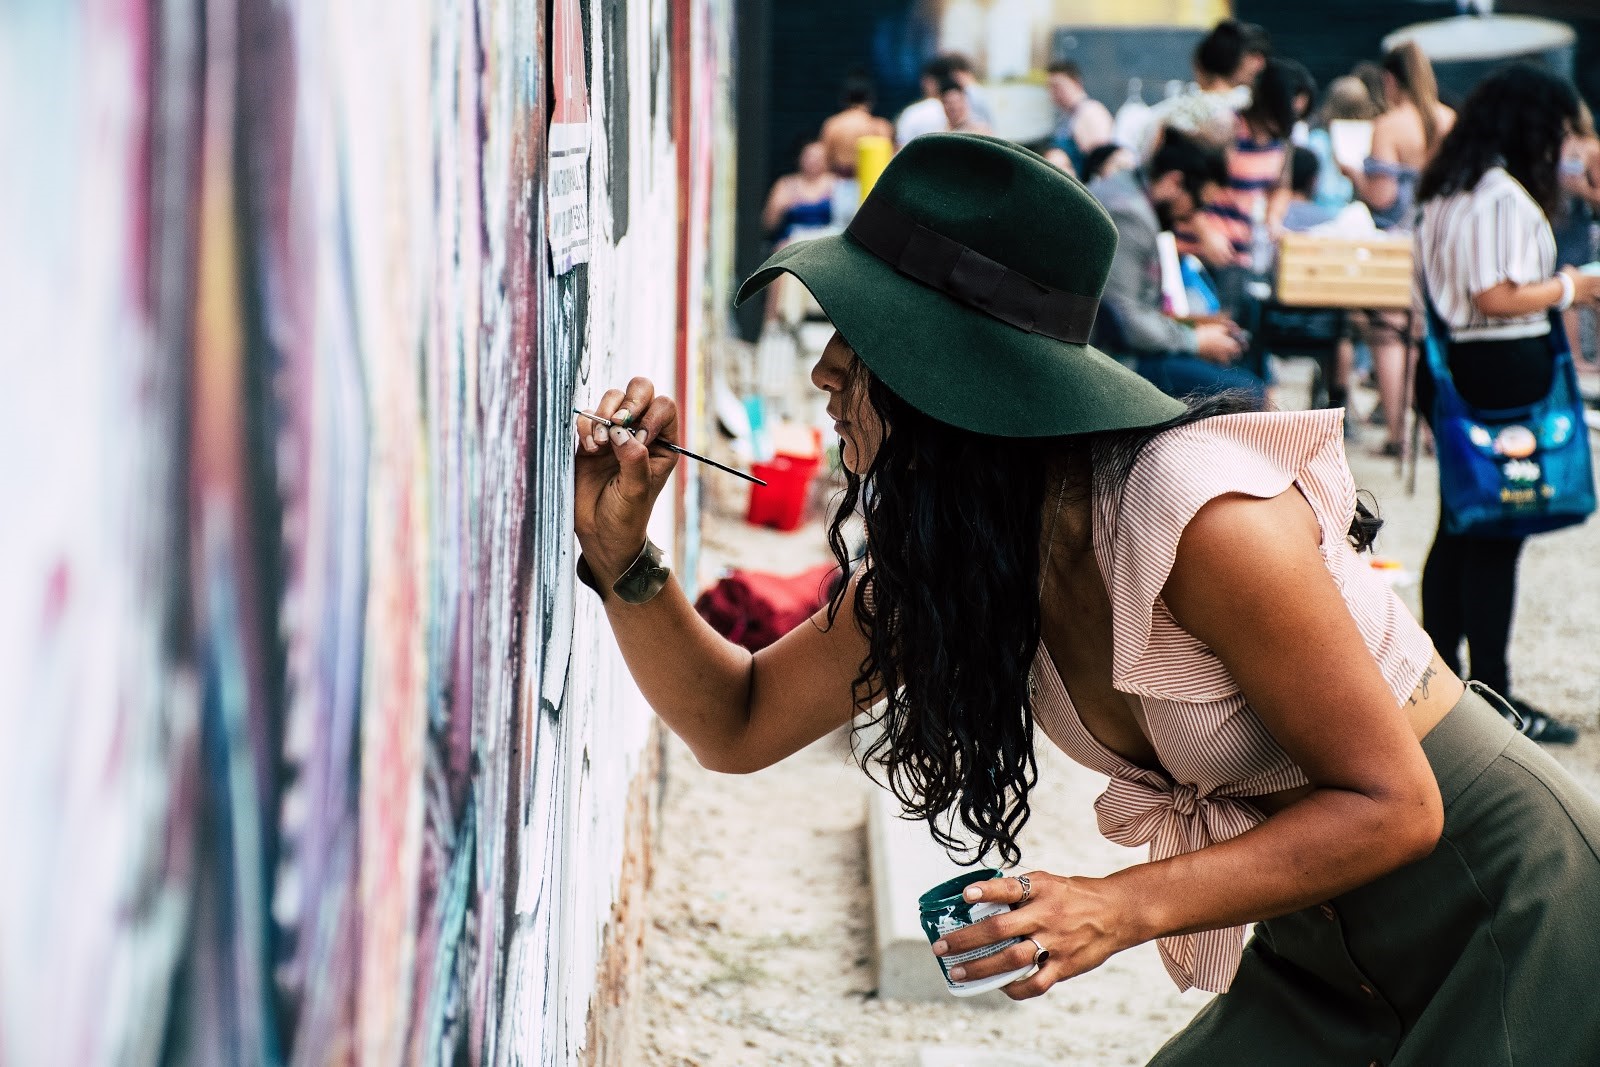 Woman wearing a hat painting art on an exterior wall